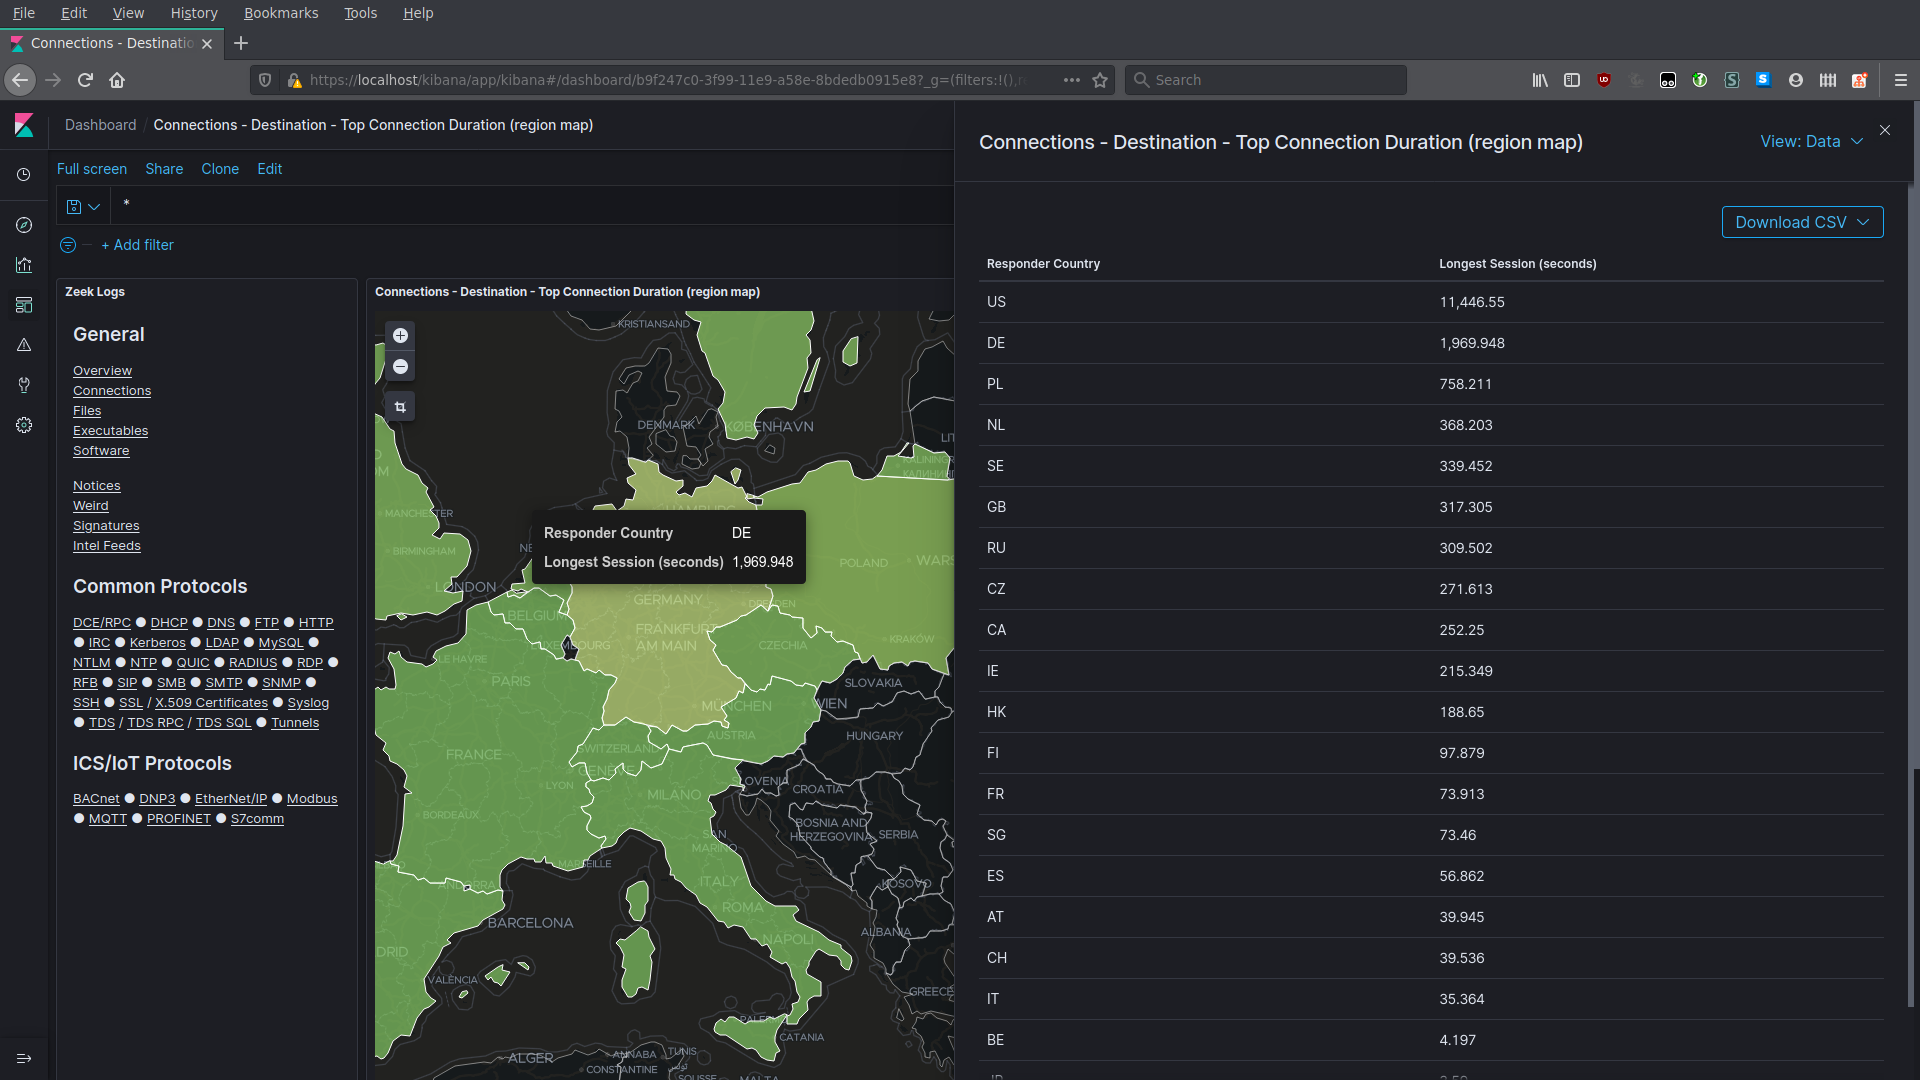 Kibana includes both coordinate and region map types